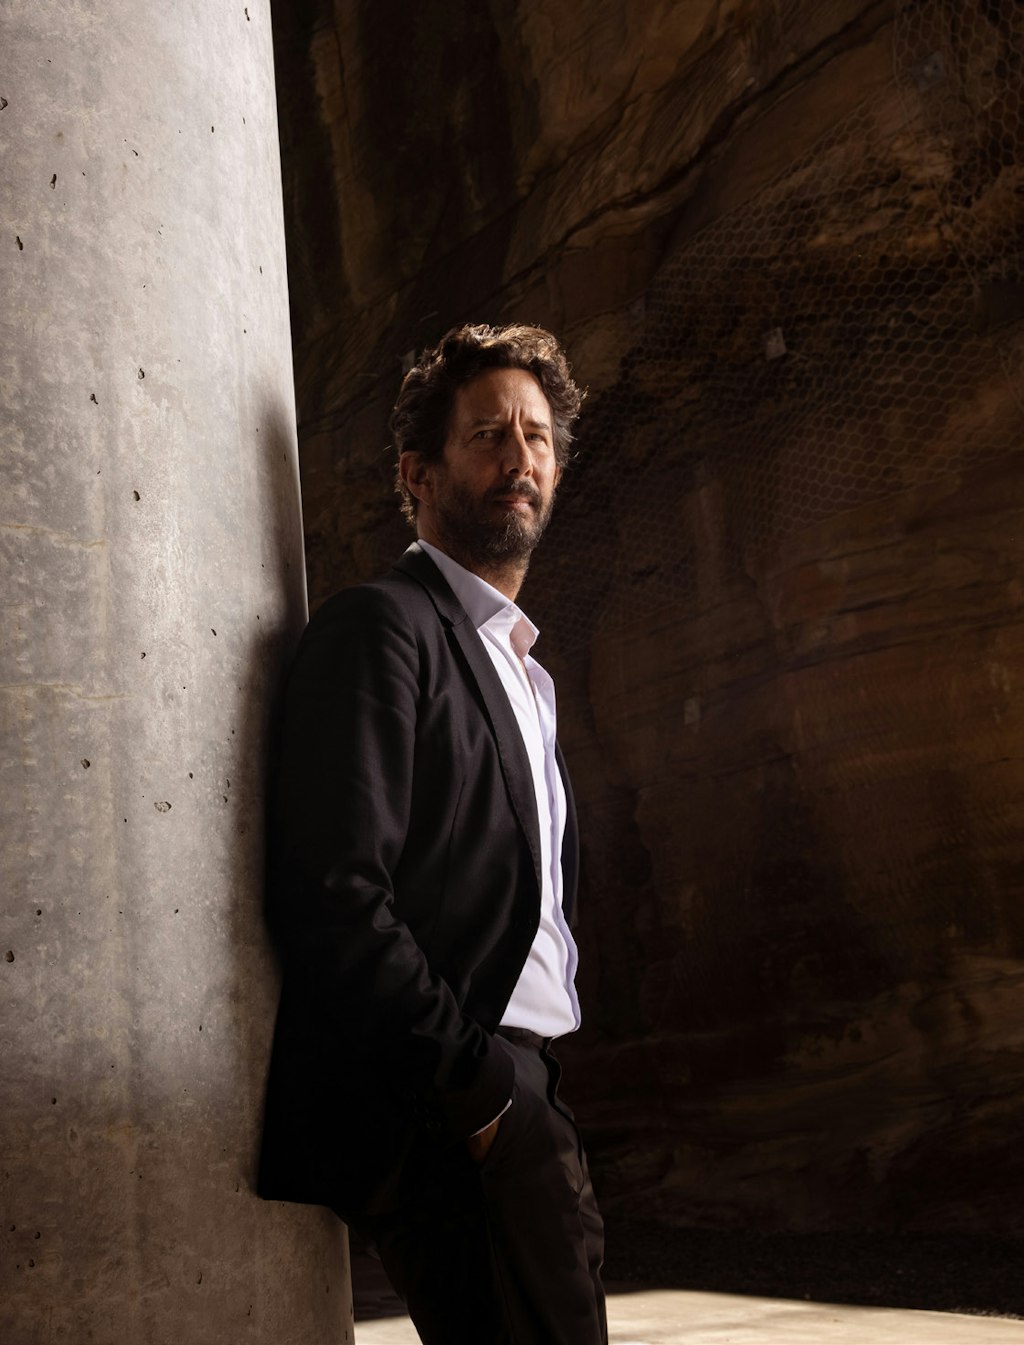 A person with a beard and short, wavy hair, dressed in a suit and open-necked shirt, stands against a concrete wall with their hands in their pockets.